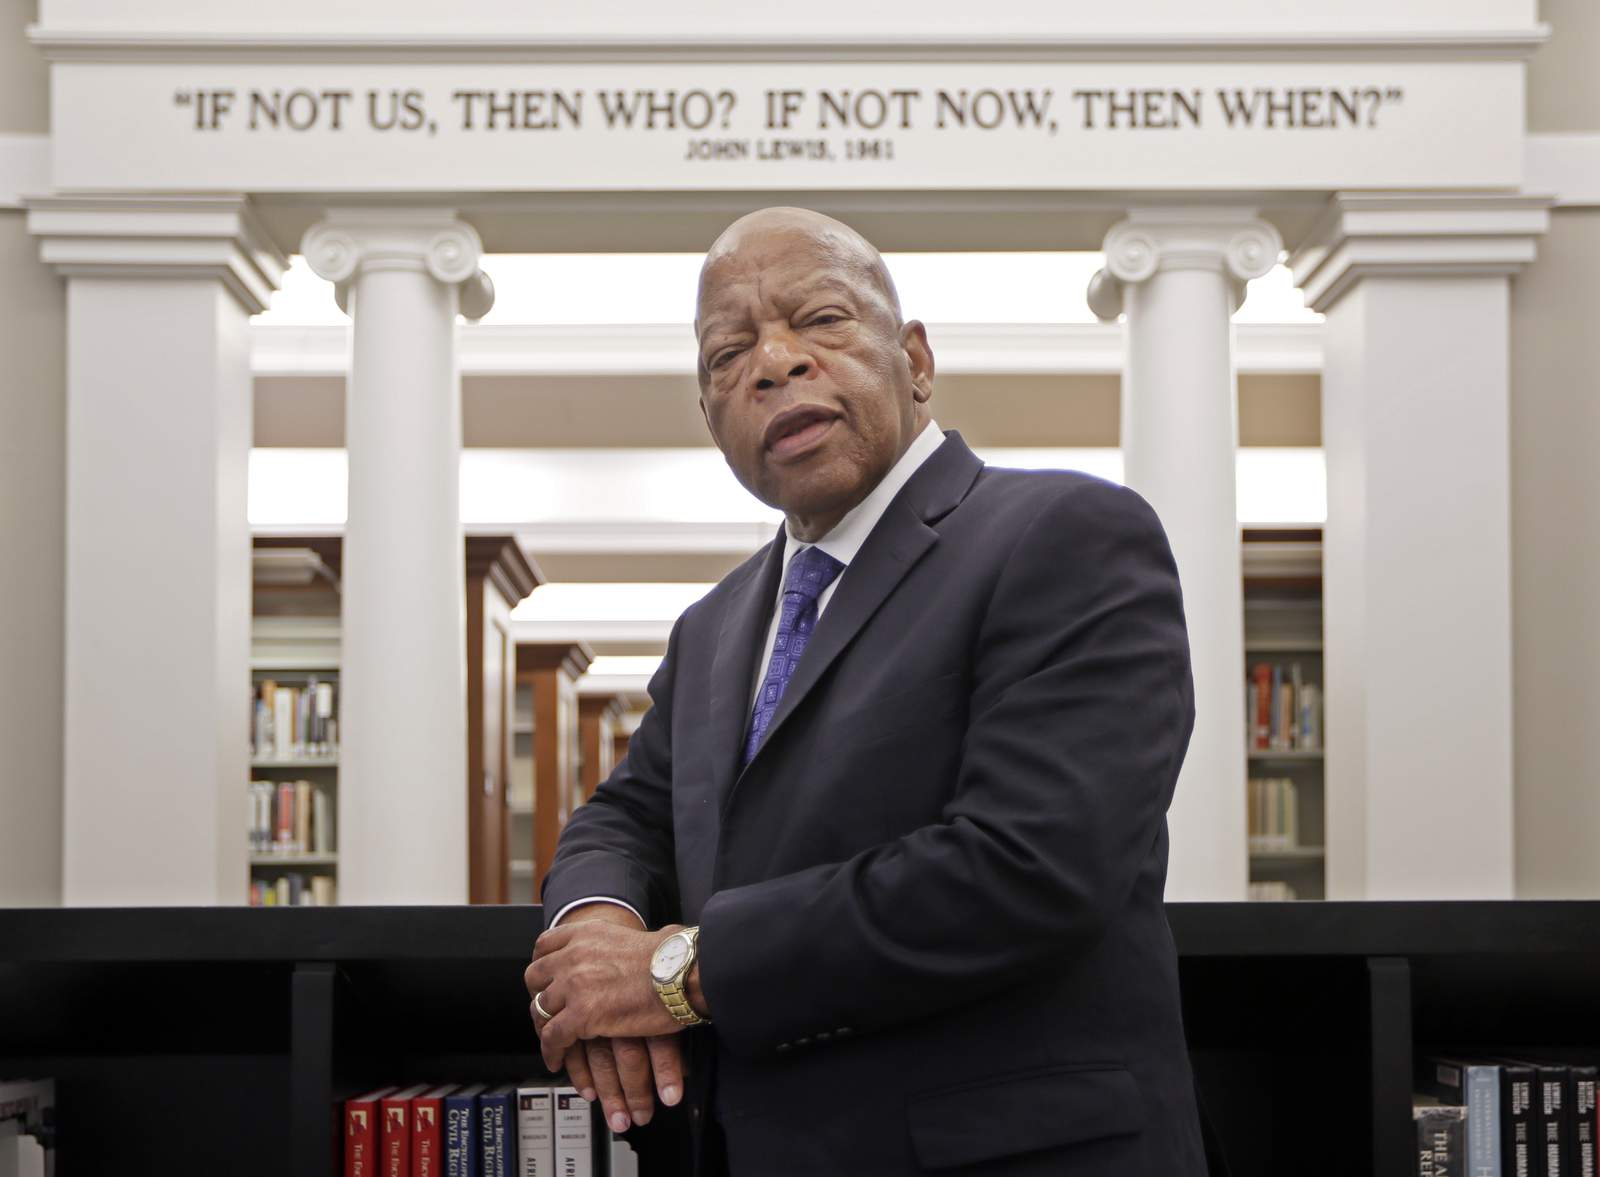 Latest graphic novel about John Lewis coming in August